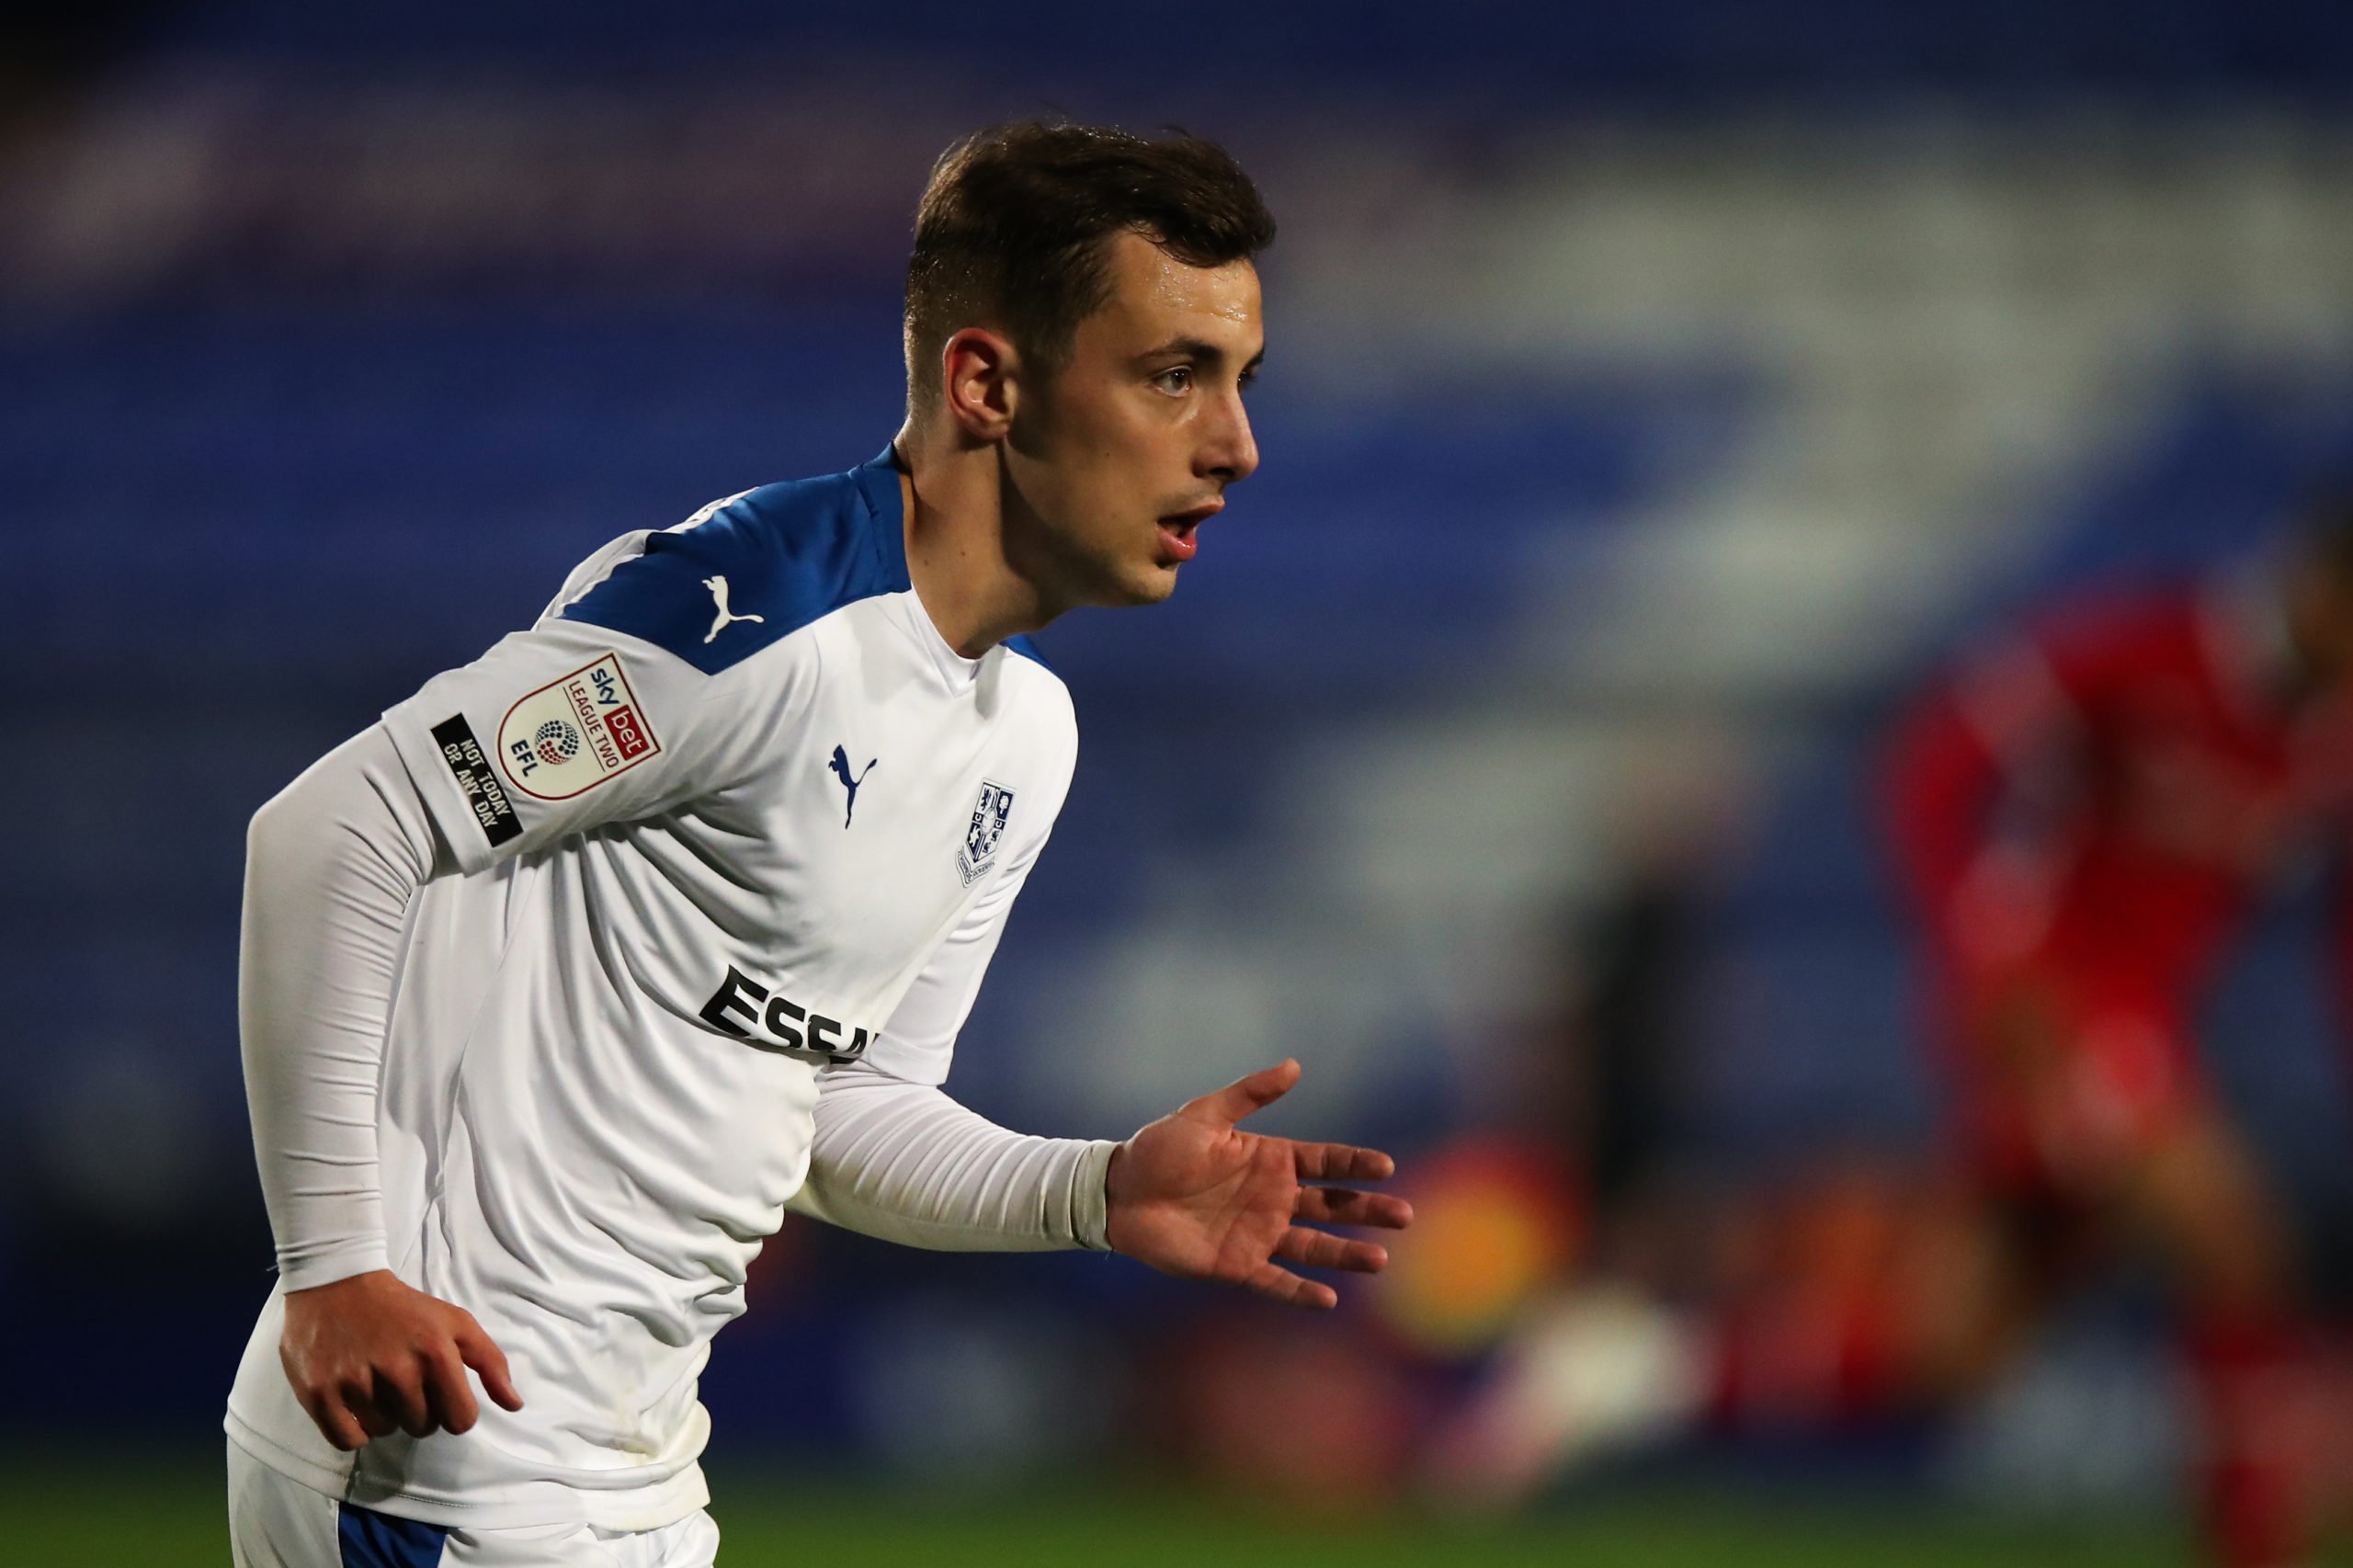 'The Irish Cafu'; Celtic youngster Lee O'Connor impresses Tranmere Rovers fans out on loan in the FA Cup